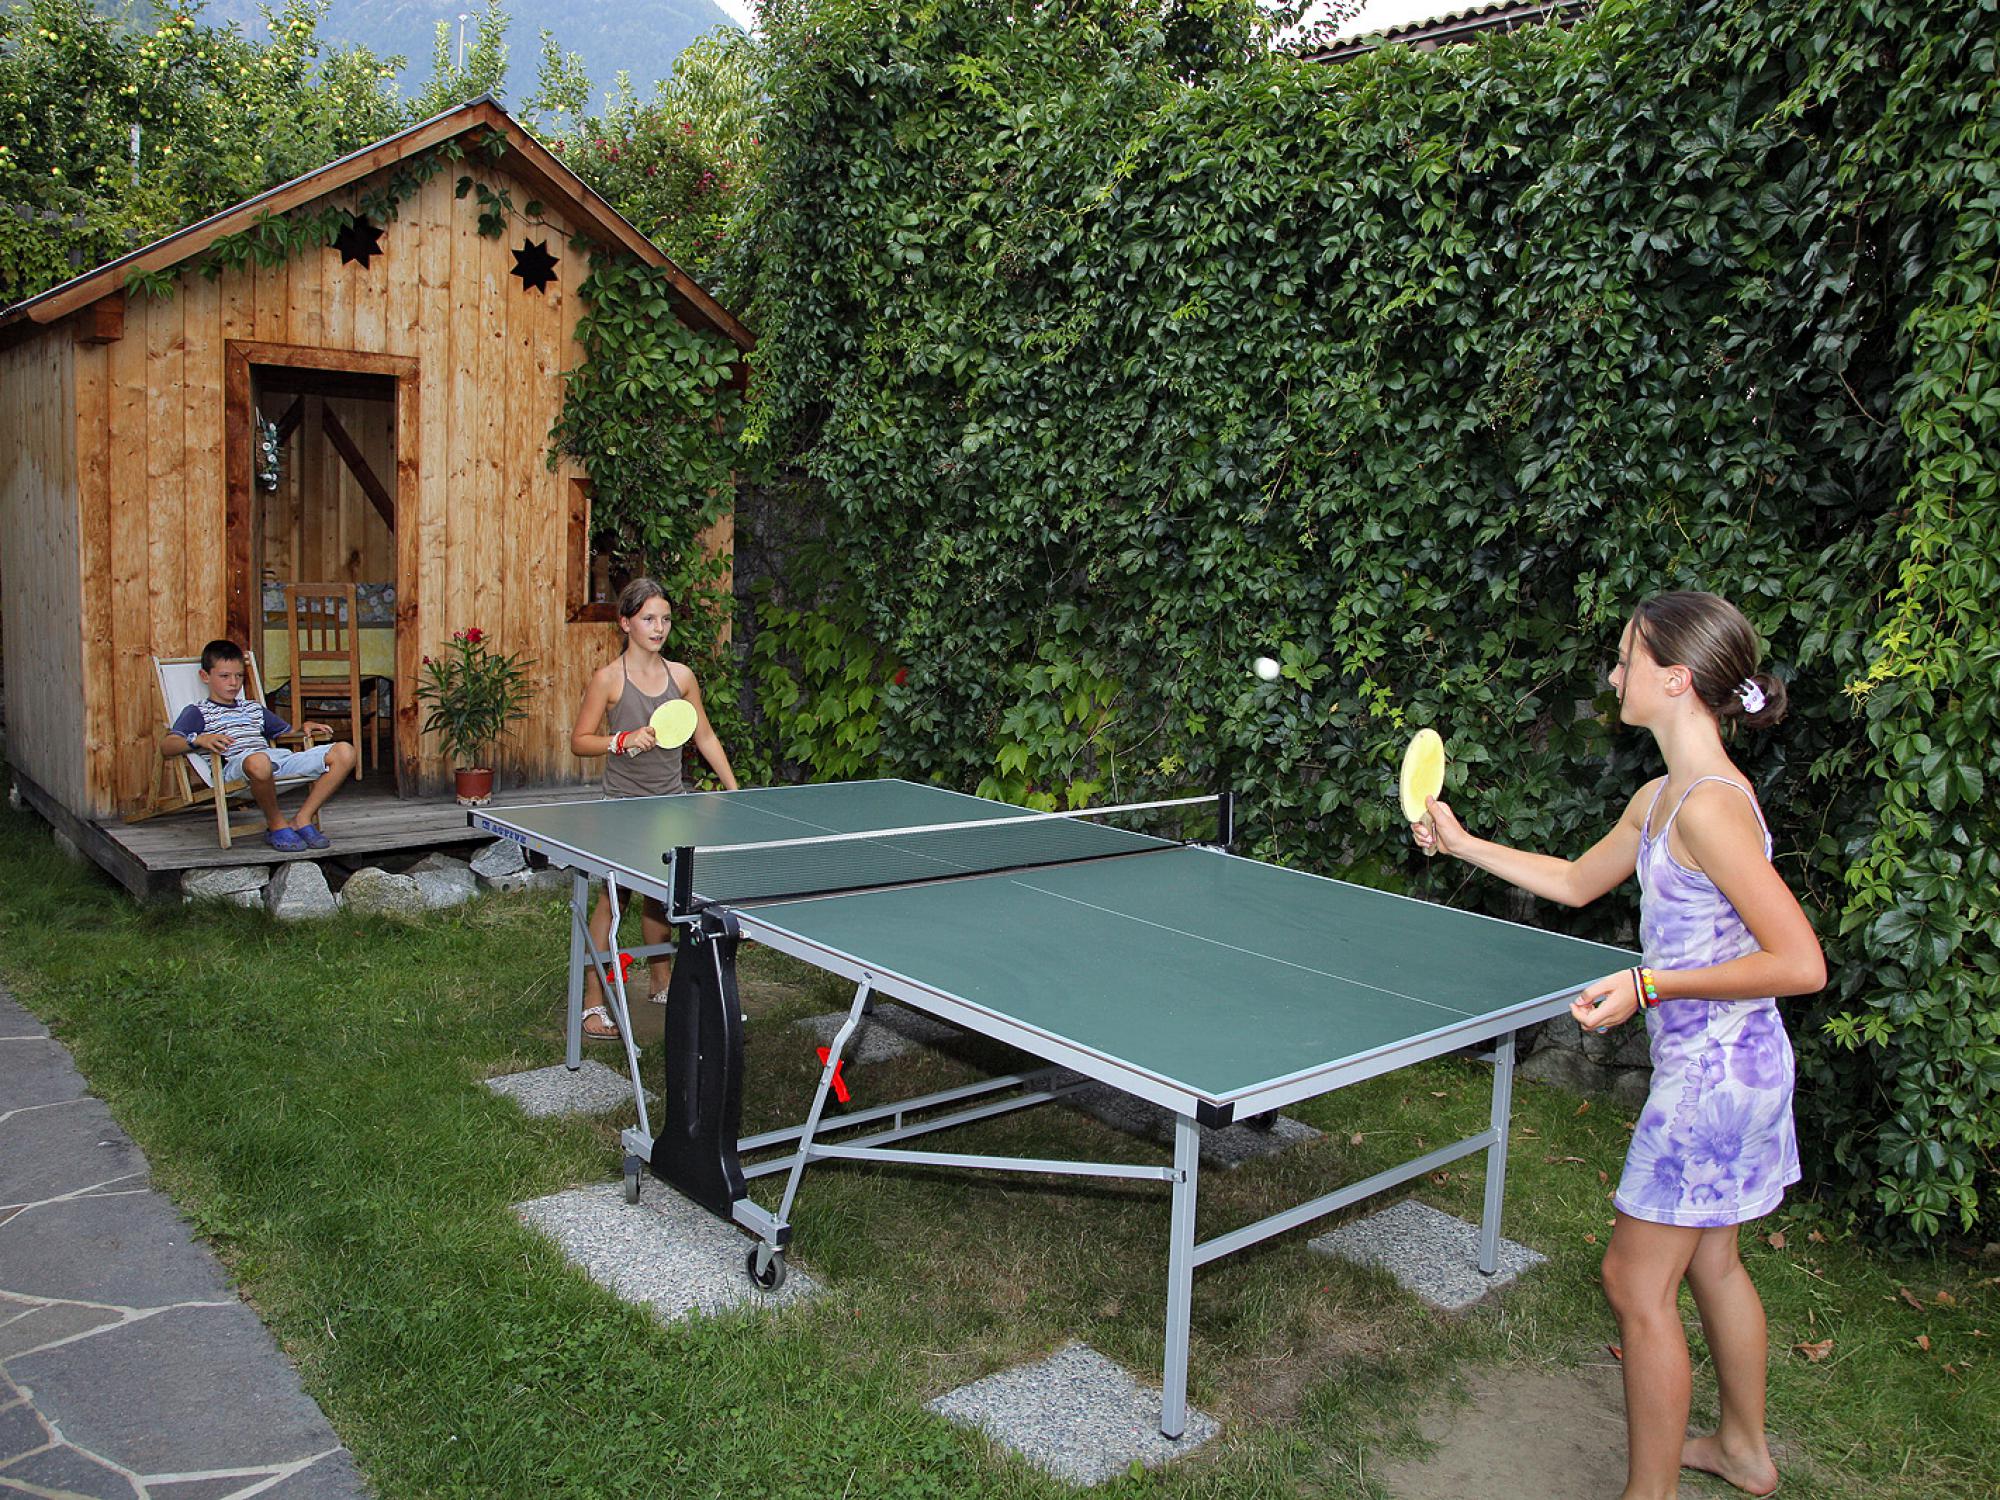 Ping pong fun for everyone, young and old